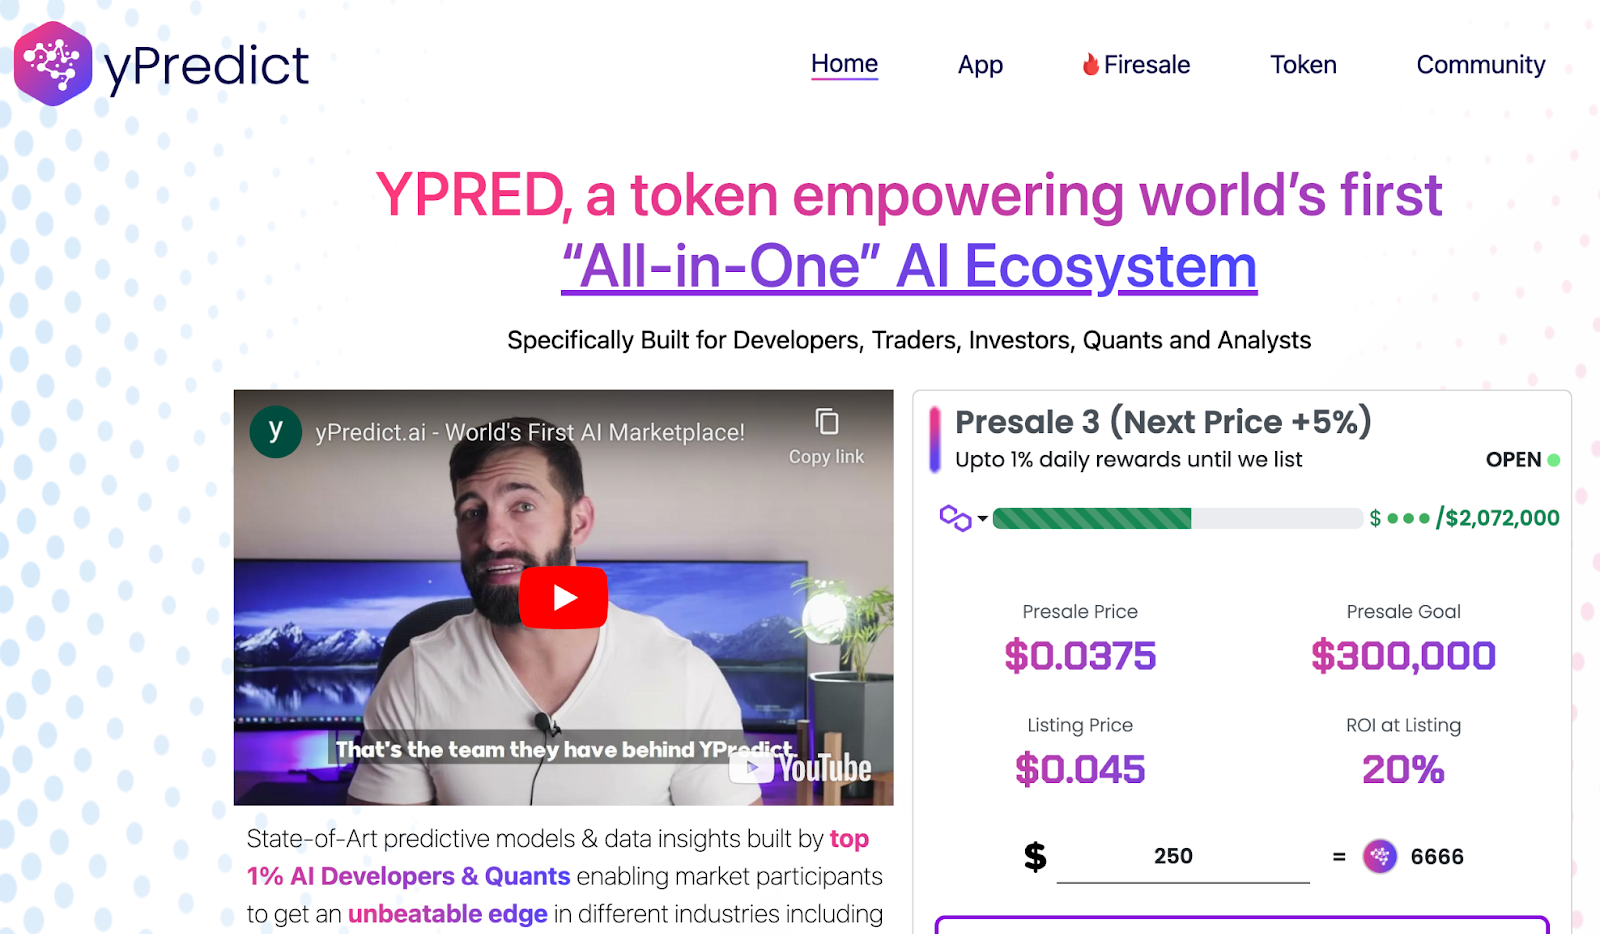 YPRED Token Presale is Live - World’s First AI ecosystem￼ 15